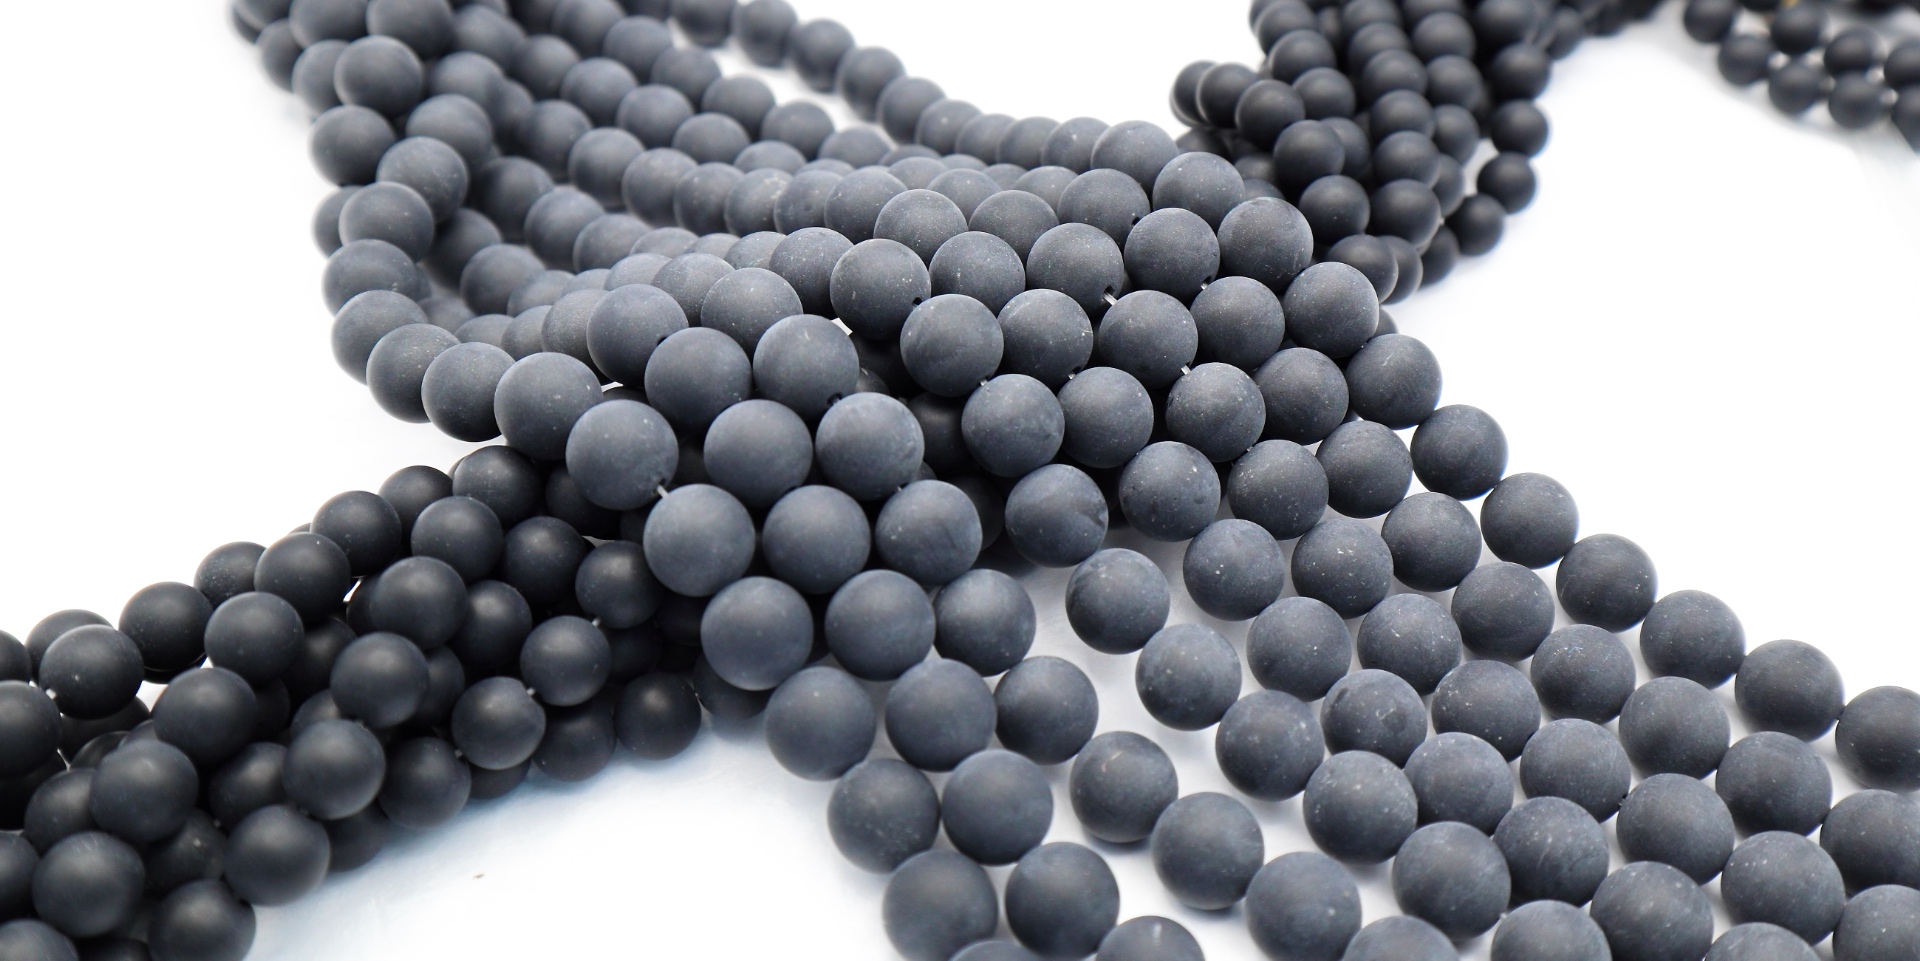 Black Agate Frosted (Matt Finish) Round Beads 4 mm